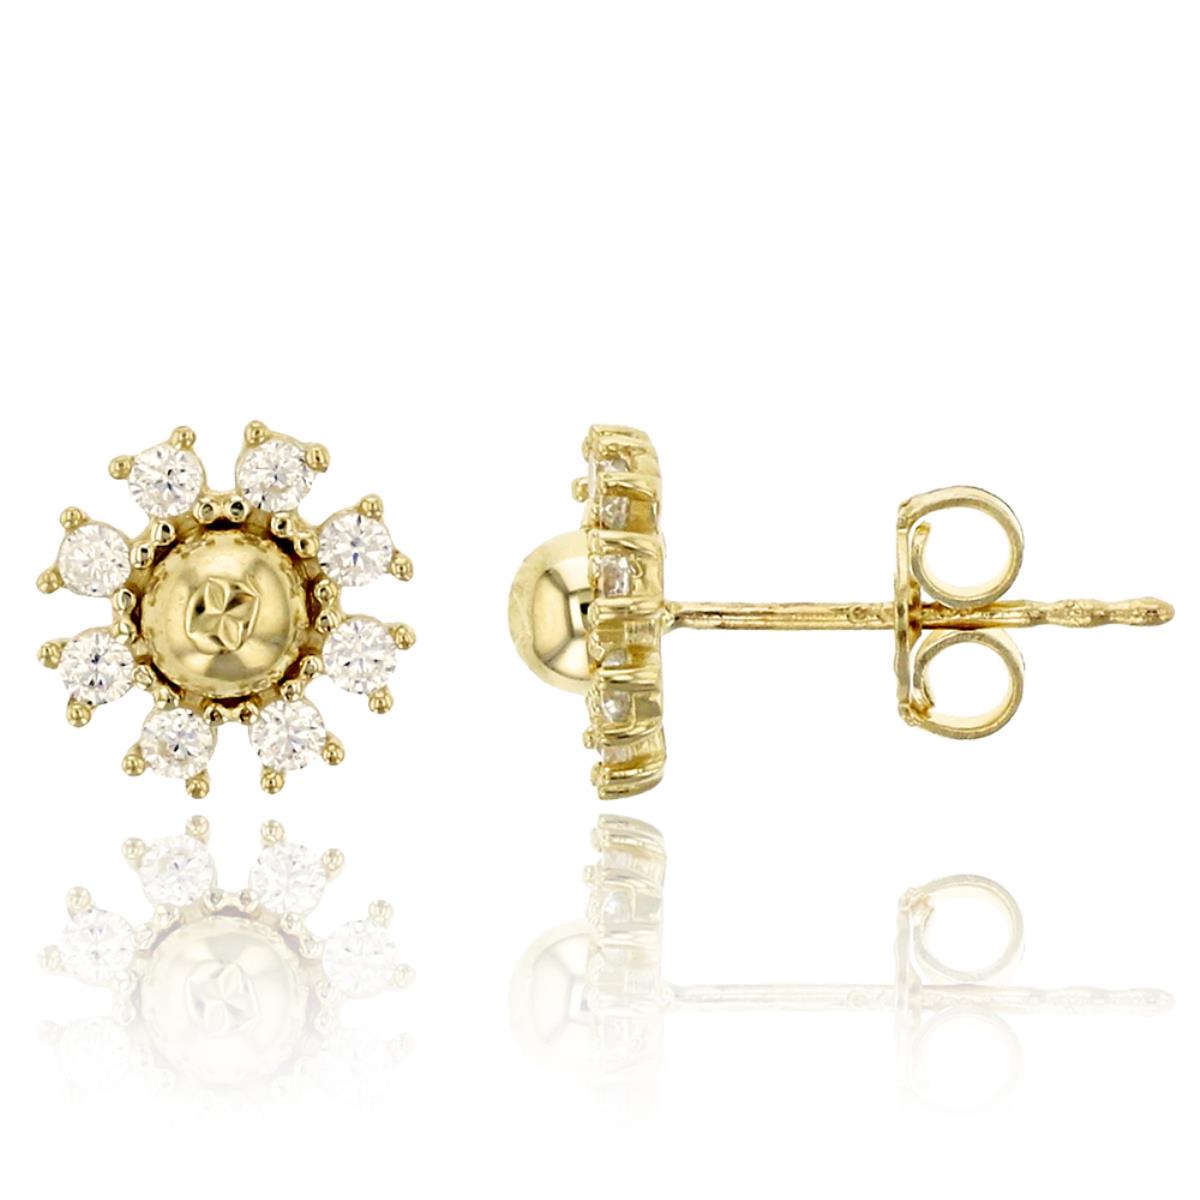 10K Yellow Gold 7mm Star DC Micropave Flower Stud Earring